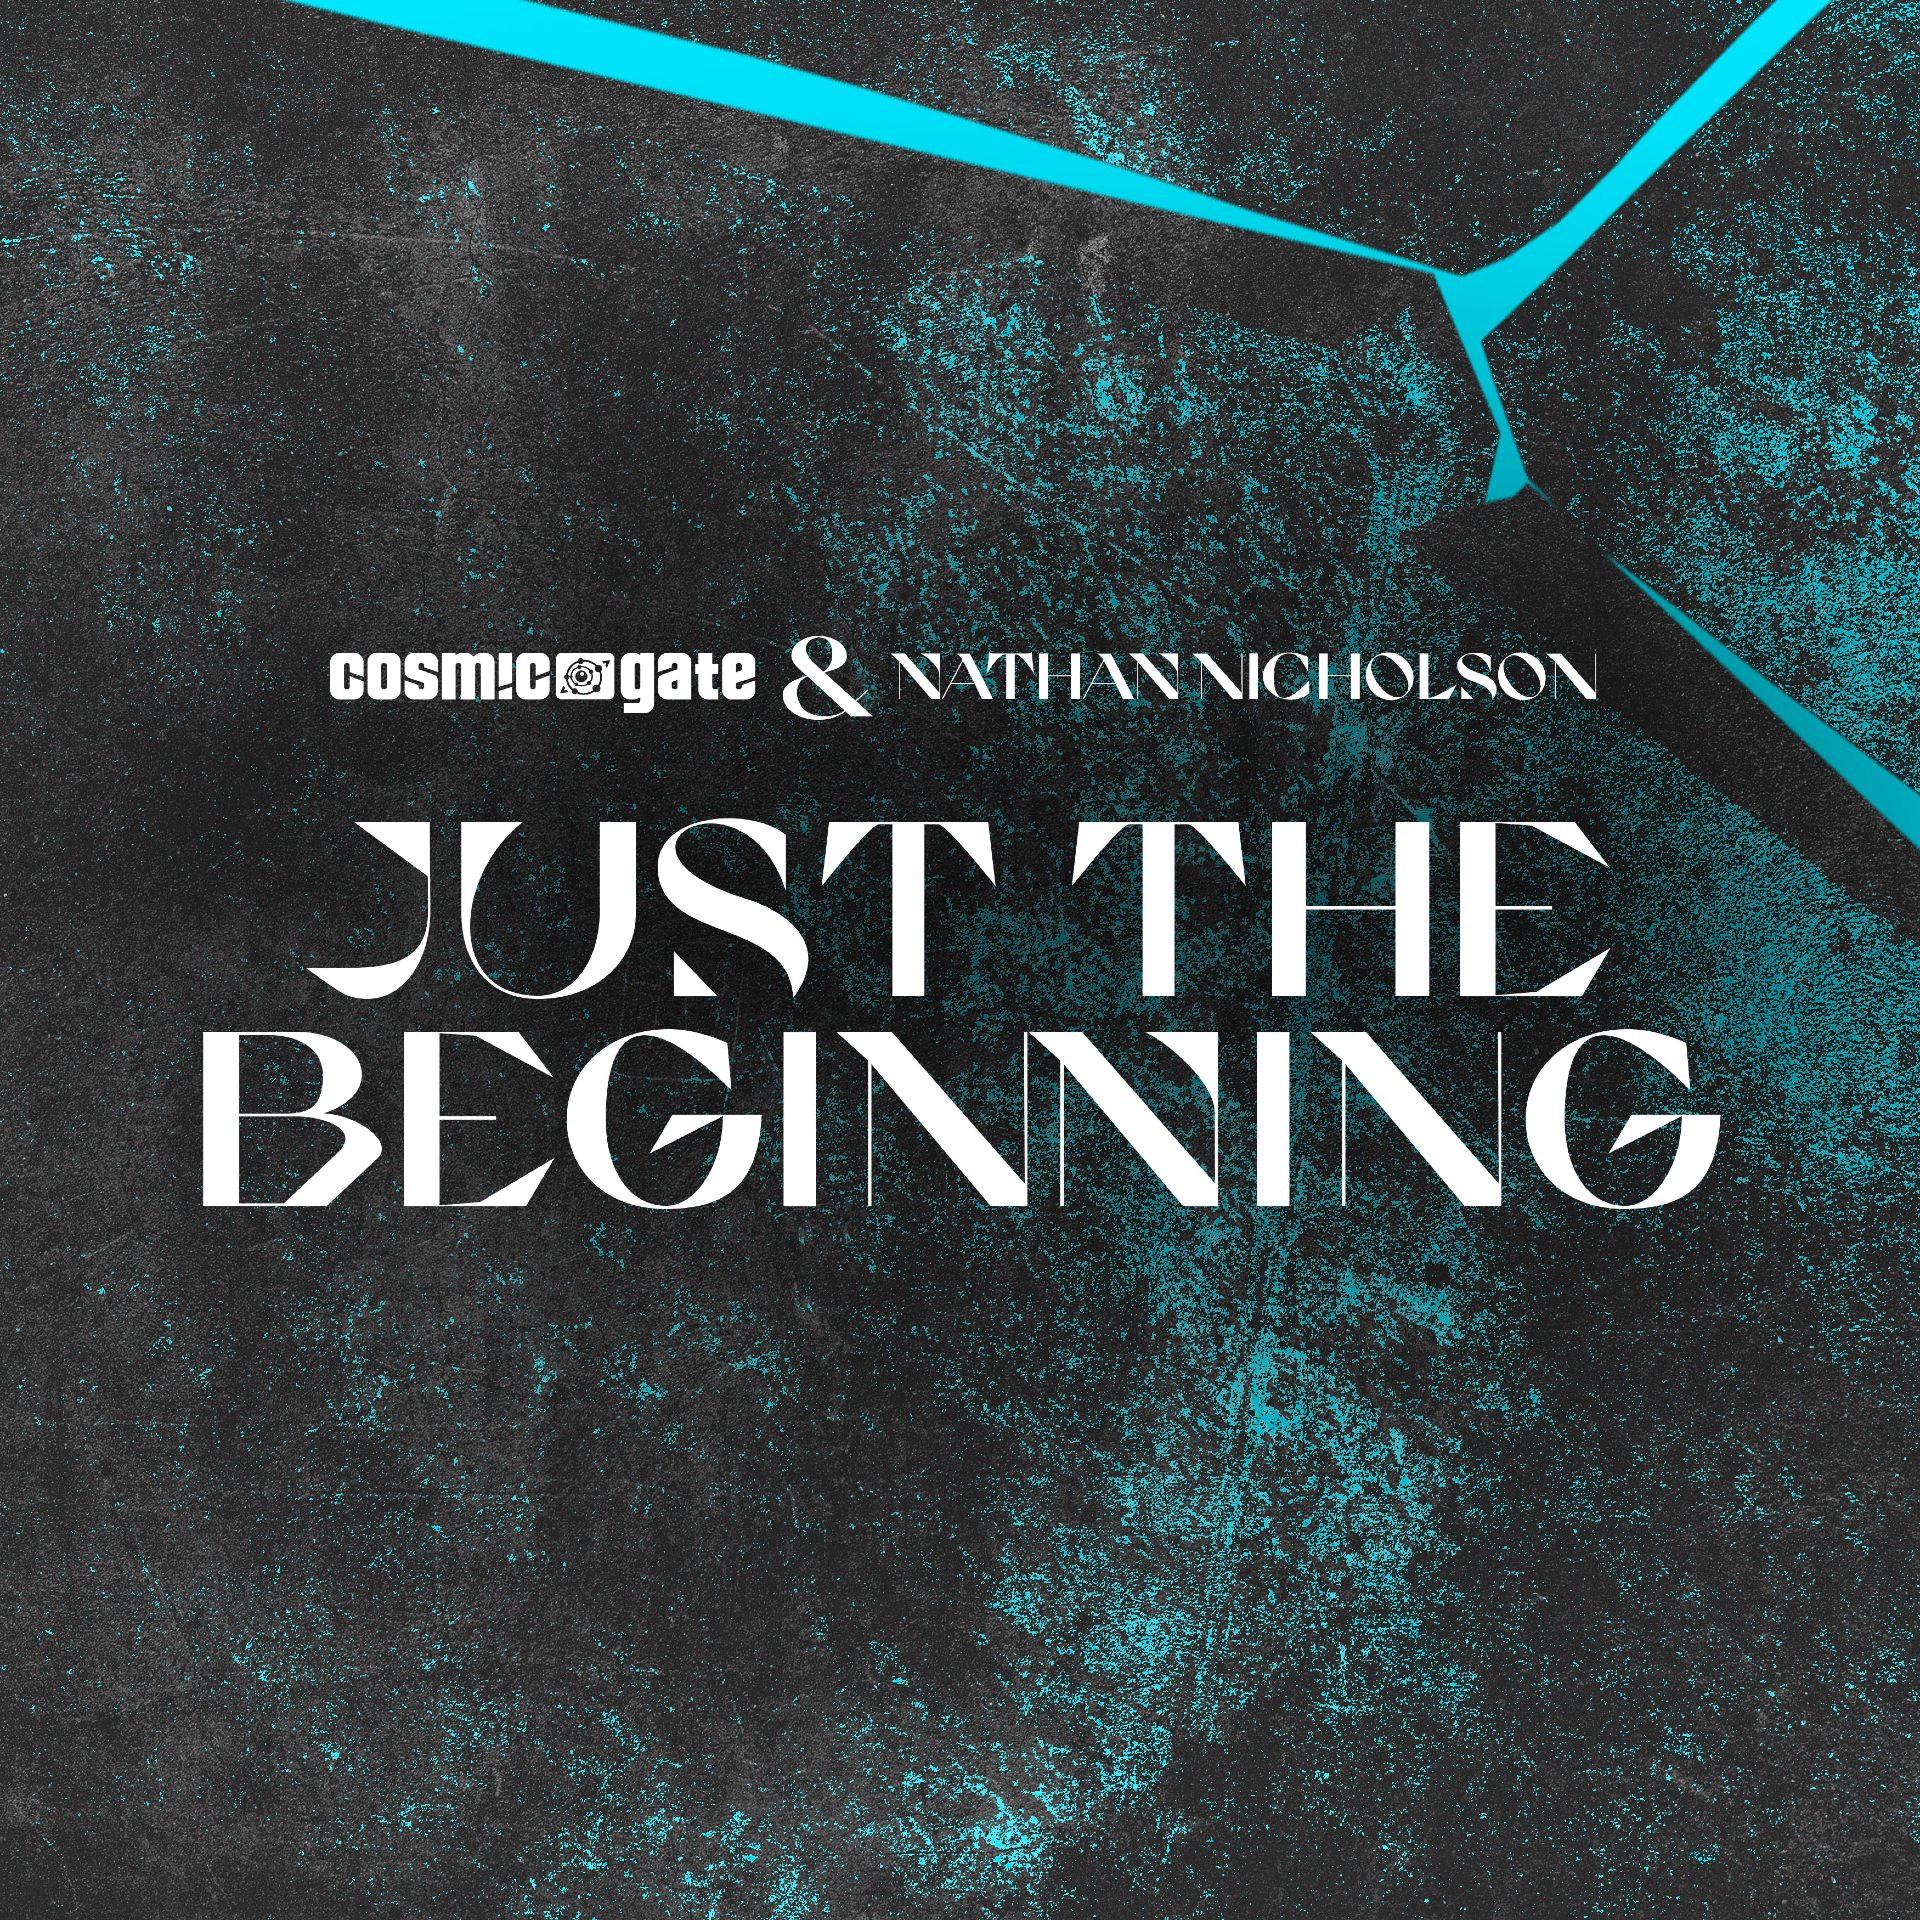 Cosmic Gate feat. Nathan Nicholson presents Just The Beginning on Black Hole Recordings